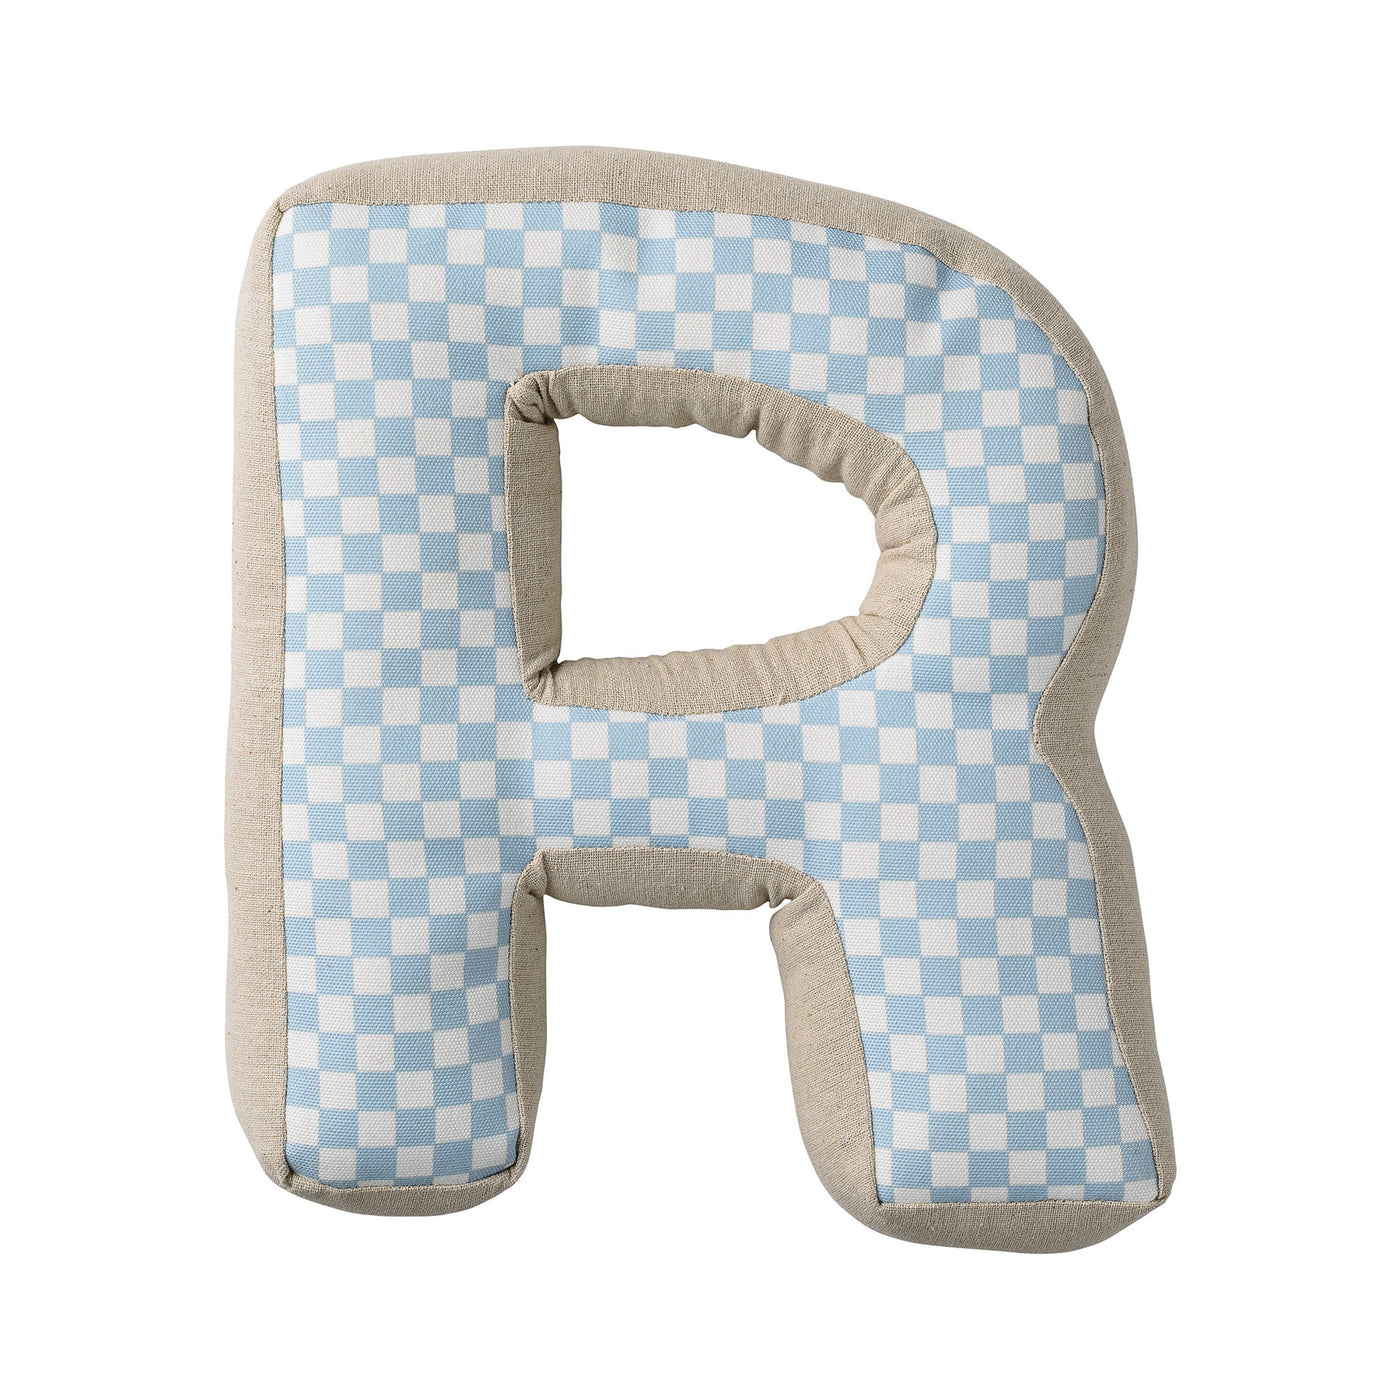 'R' Cotton Pillow with Pattern